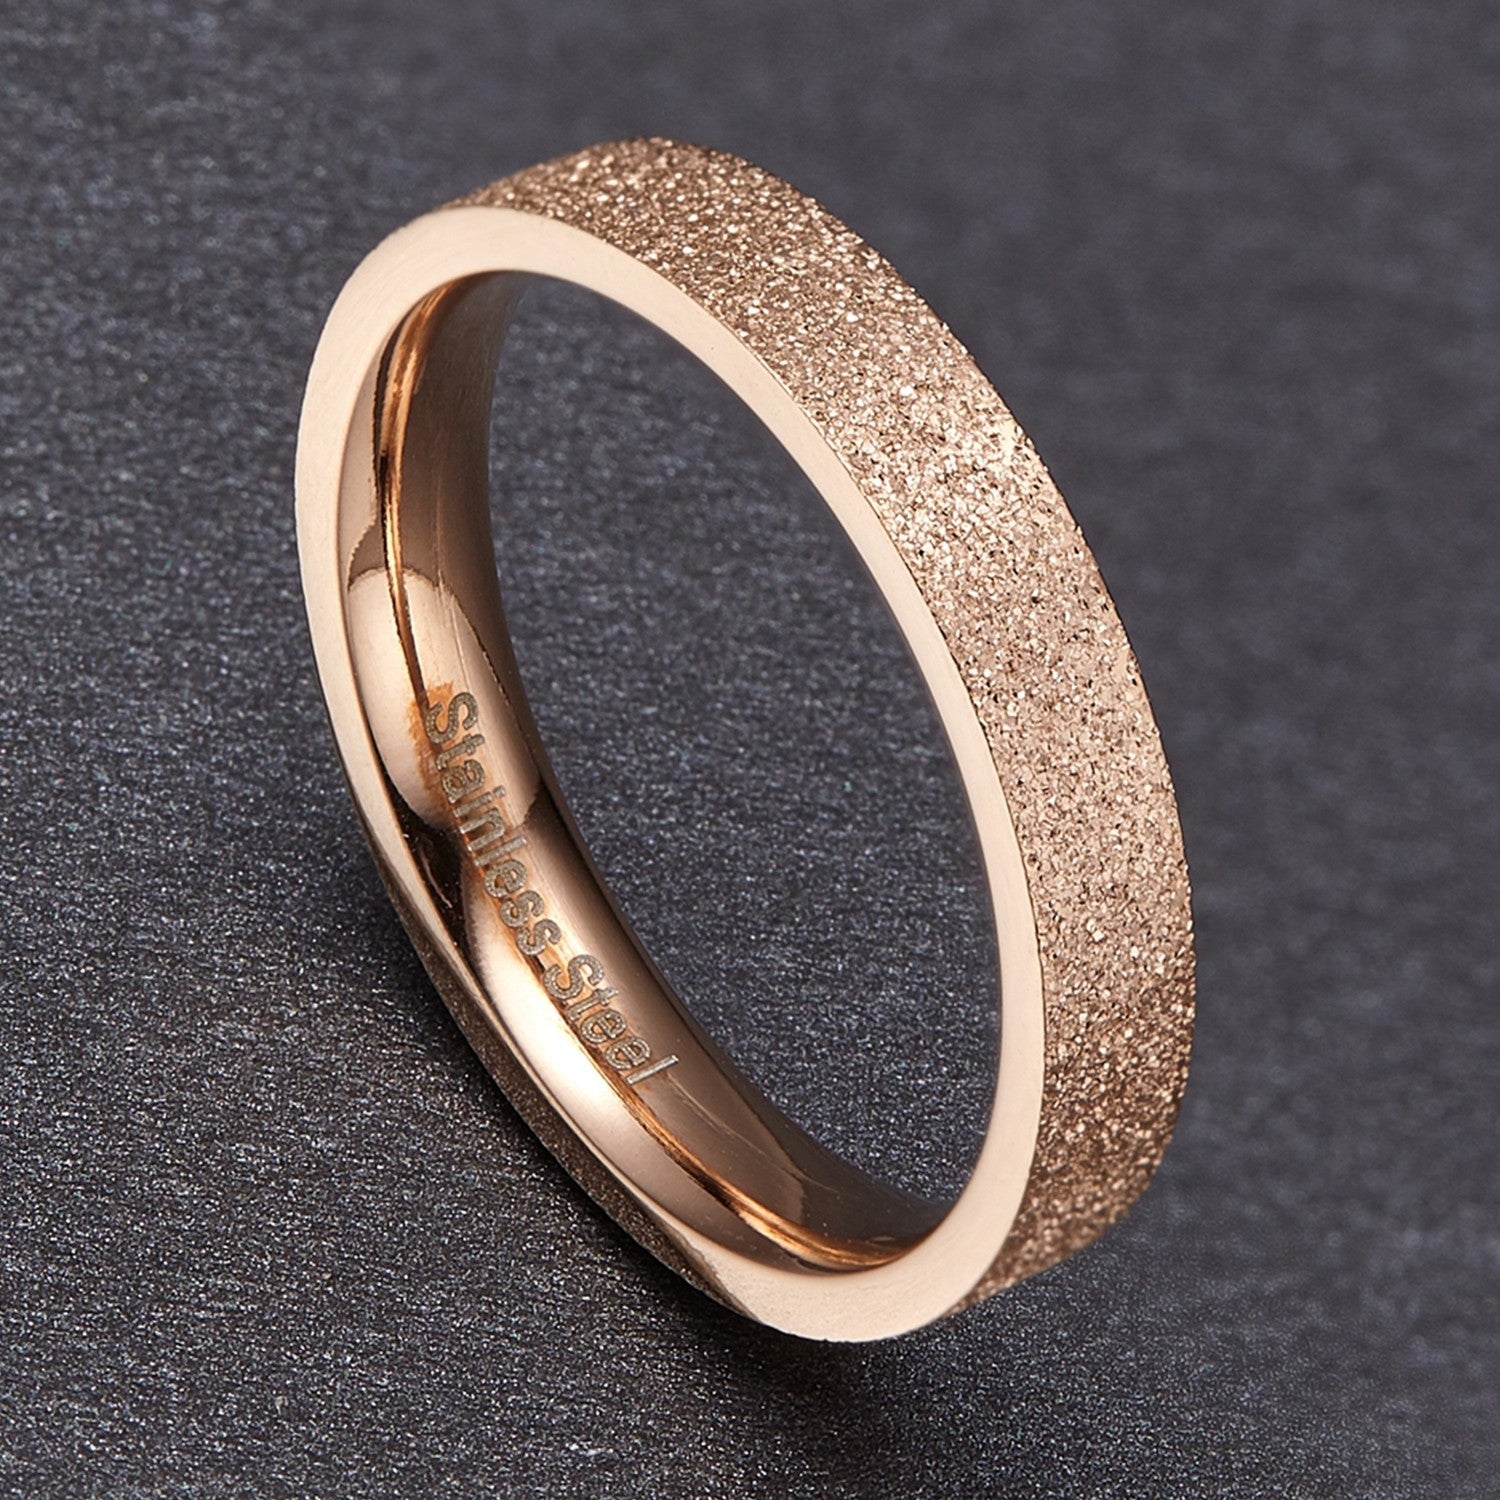 Is Your Rose Gold Worth the Price?